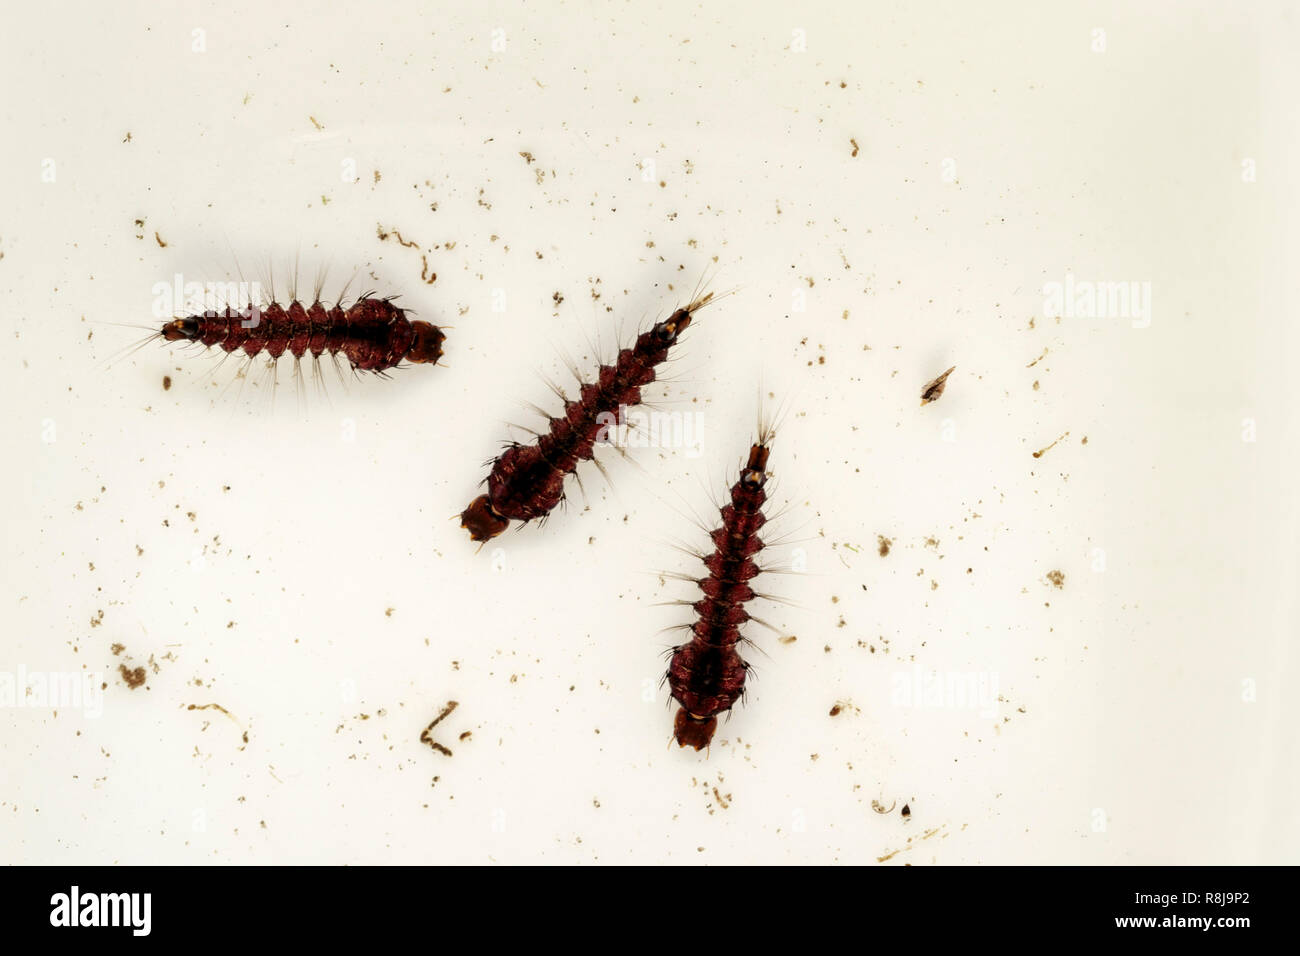 Three specimens of mosquito larvae or wrigglers of the species called Toxorhynchites speciosus, which is a large mosquito that feed on plant sap and n Stock Photo